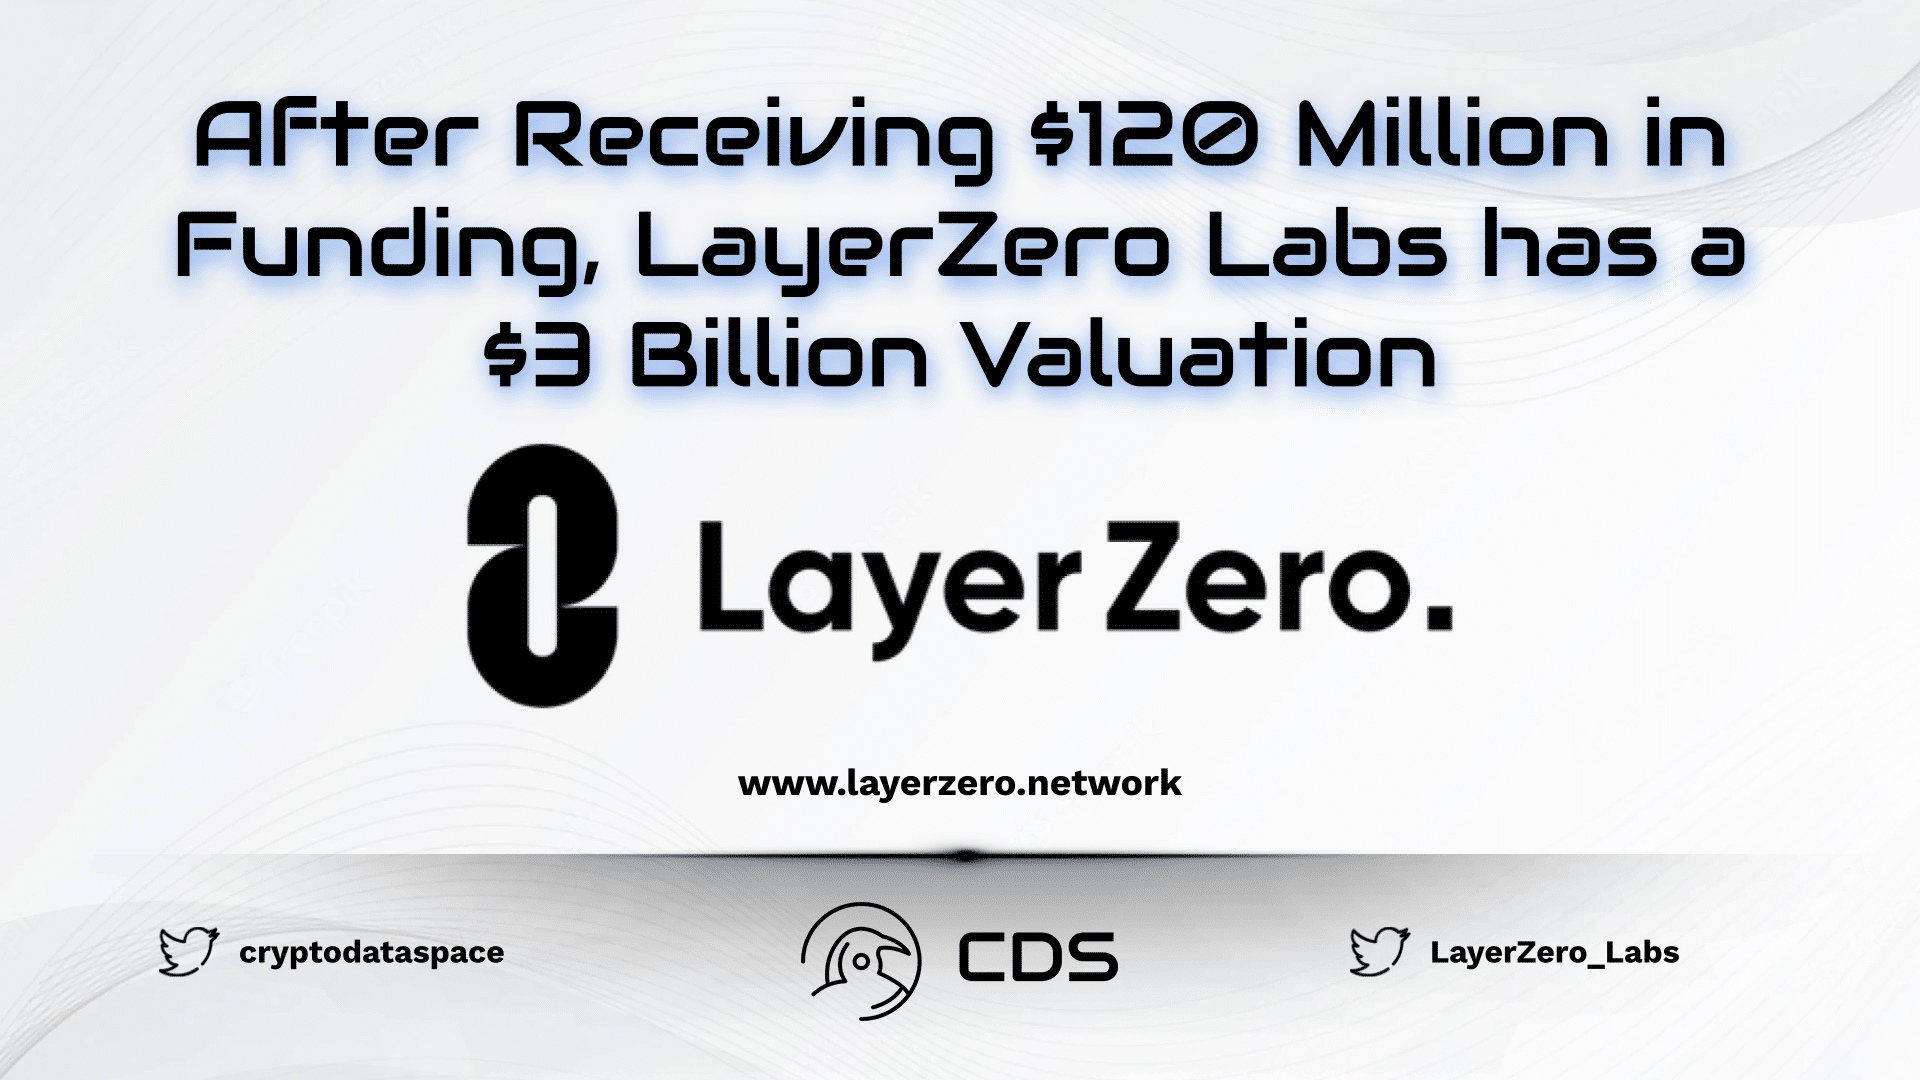 After Receiving $120 Million in Funding, LayerZero Labs has a $3 Billion Valuation